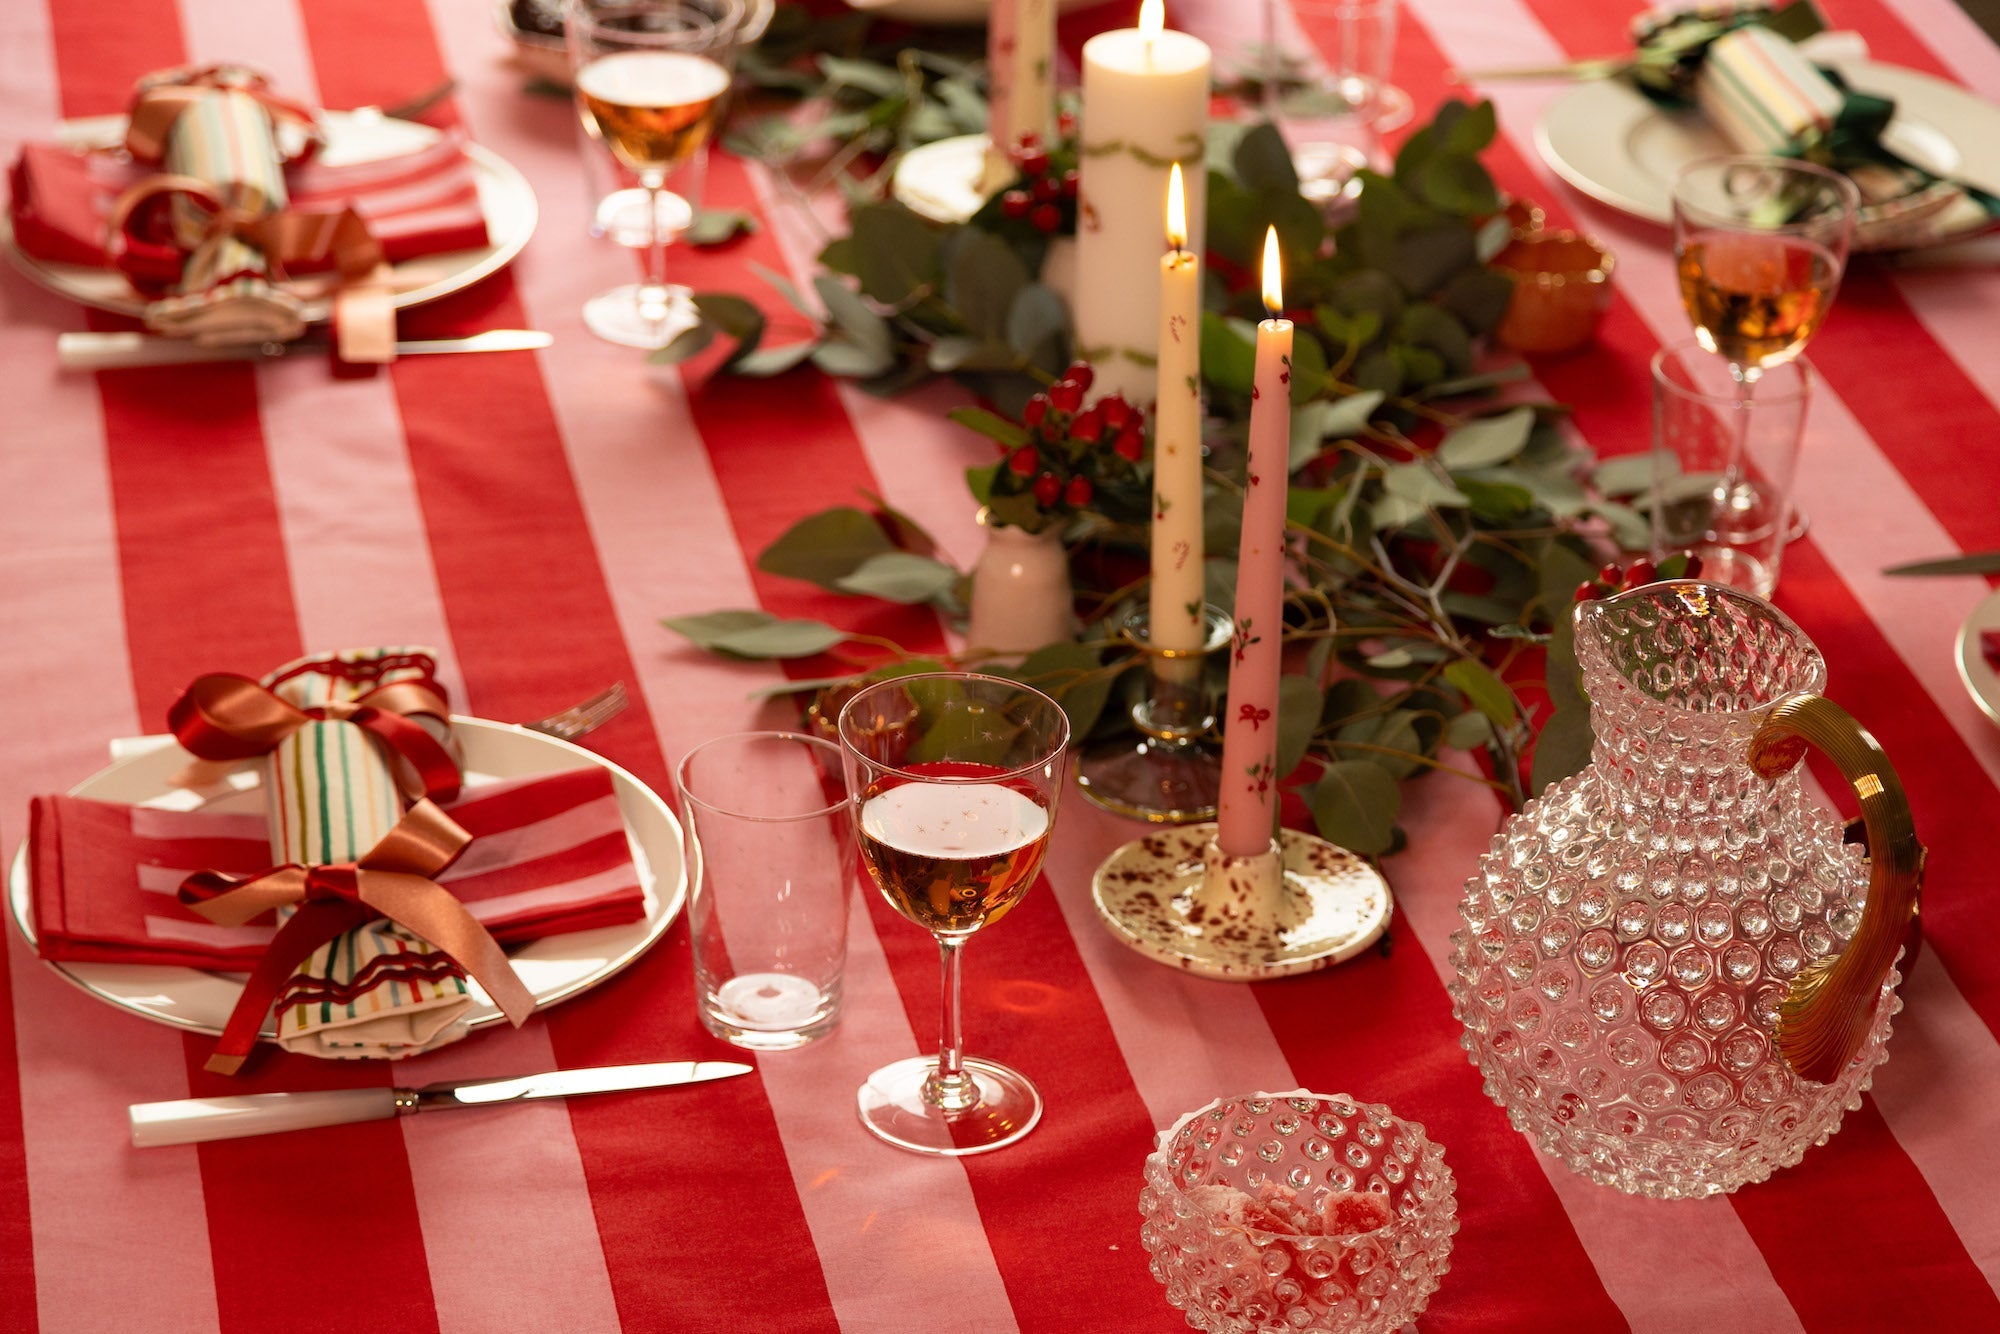 Pink and red Christmas table setting